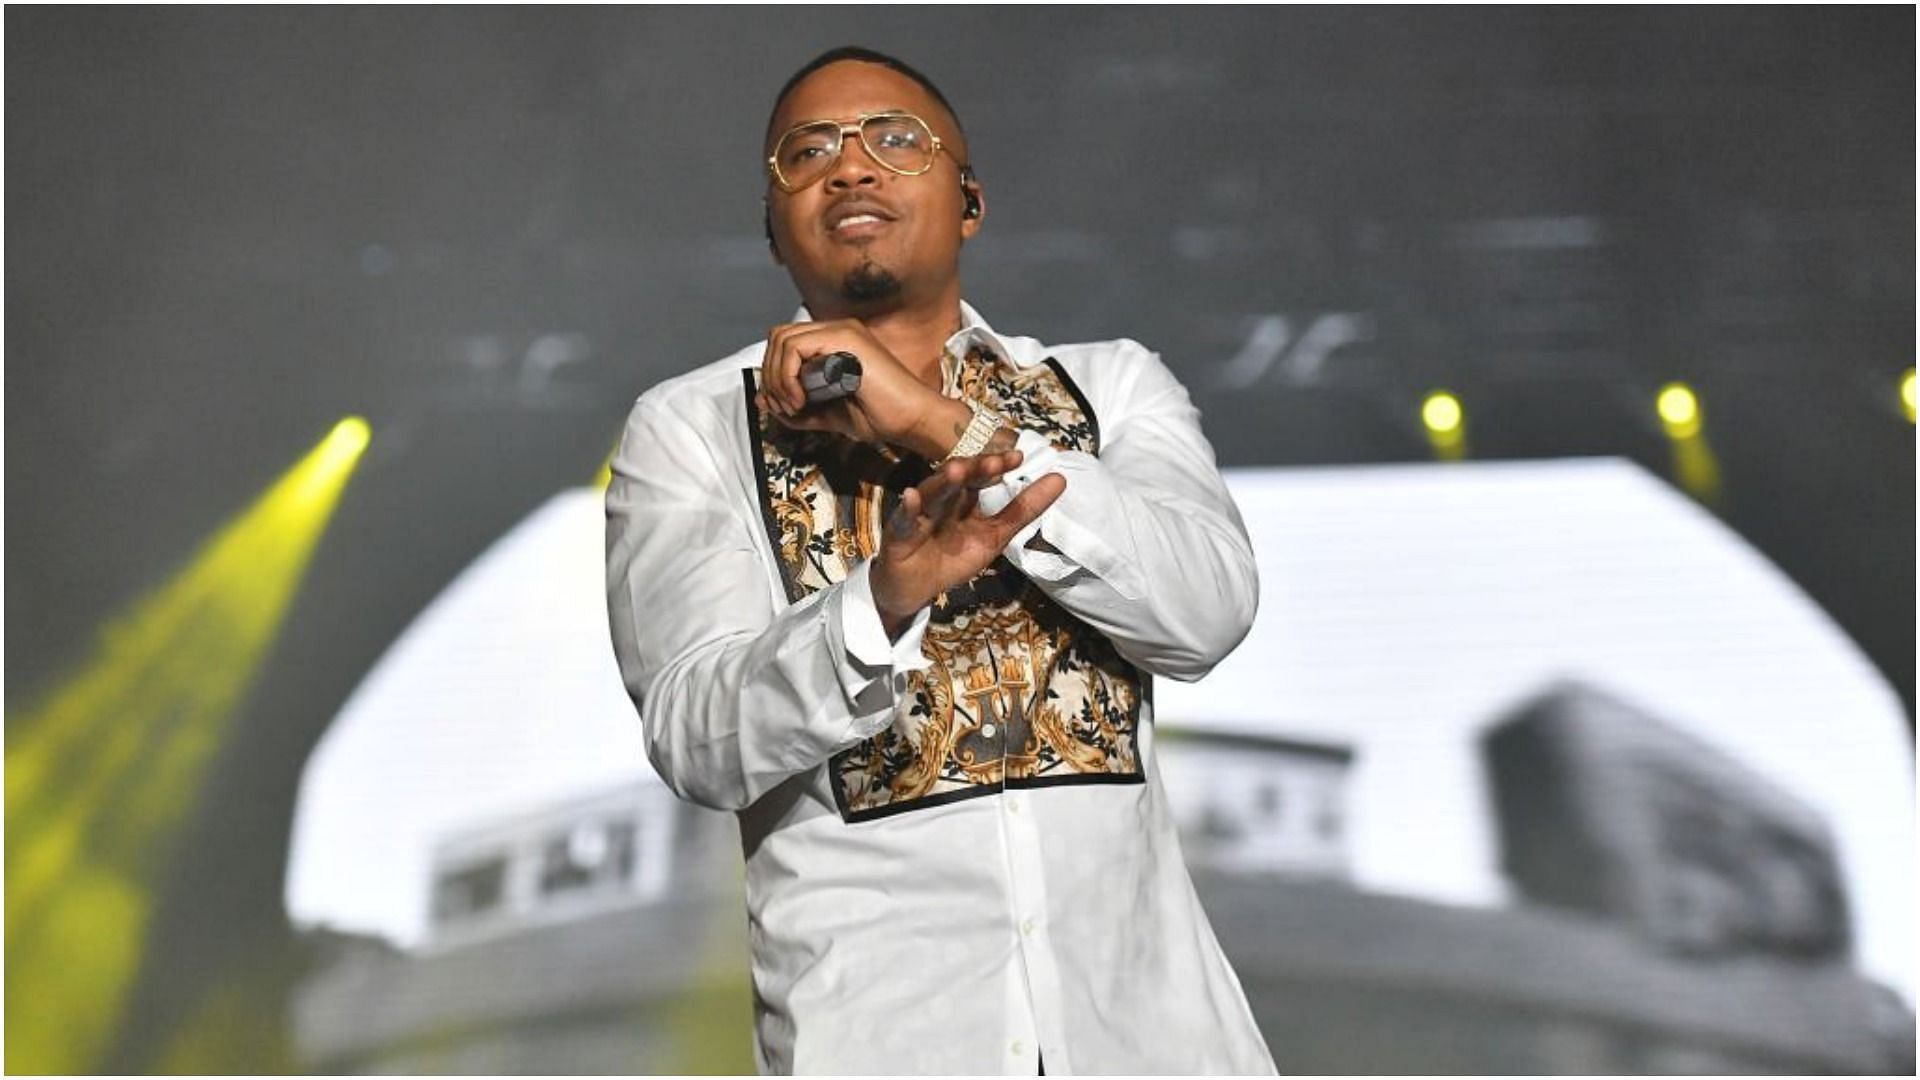 Nas has been sued for re-uploading a photo on Instagram (Image via Paras Griffin/Getty Images)